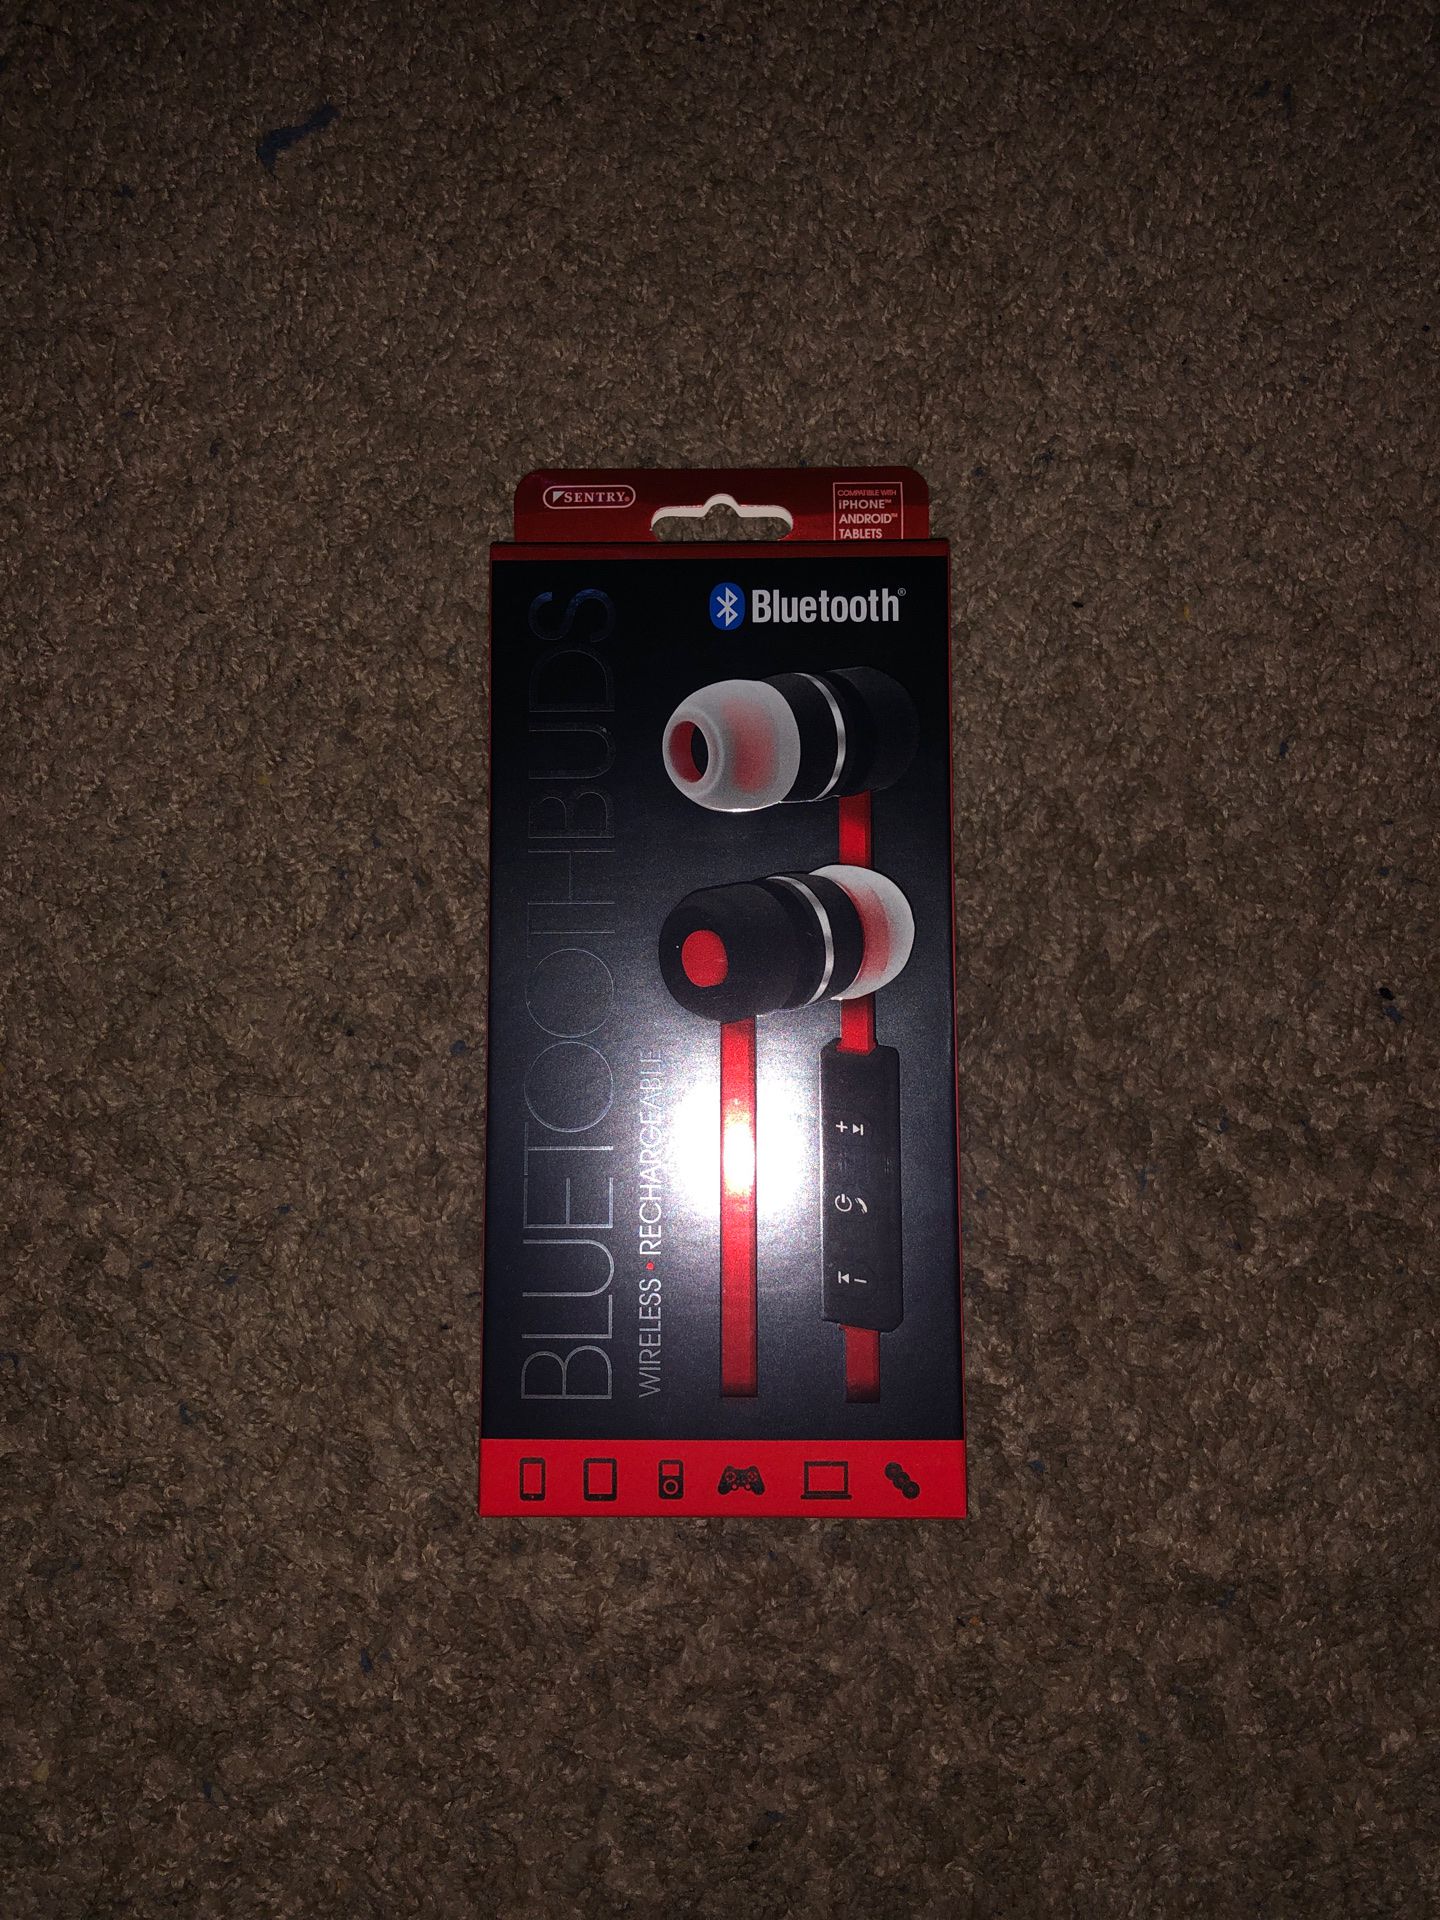 (Red and black) Bluetooth headphones